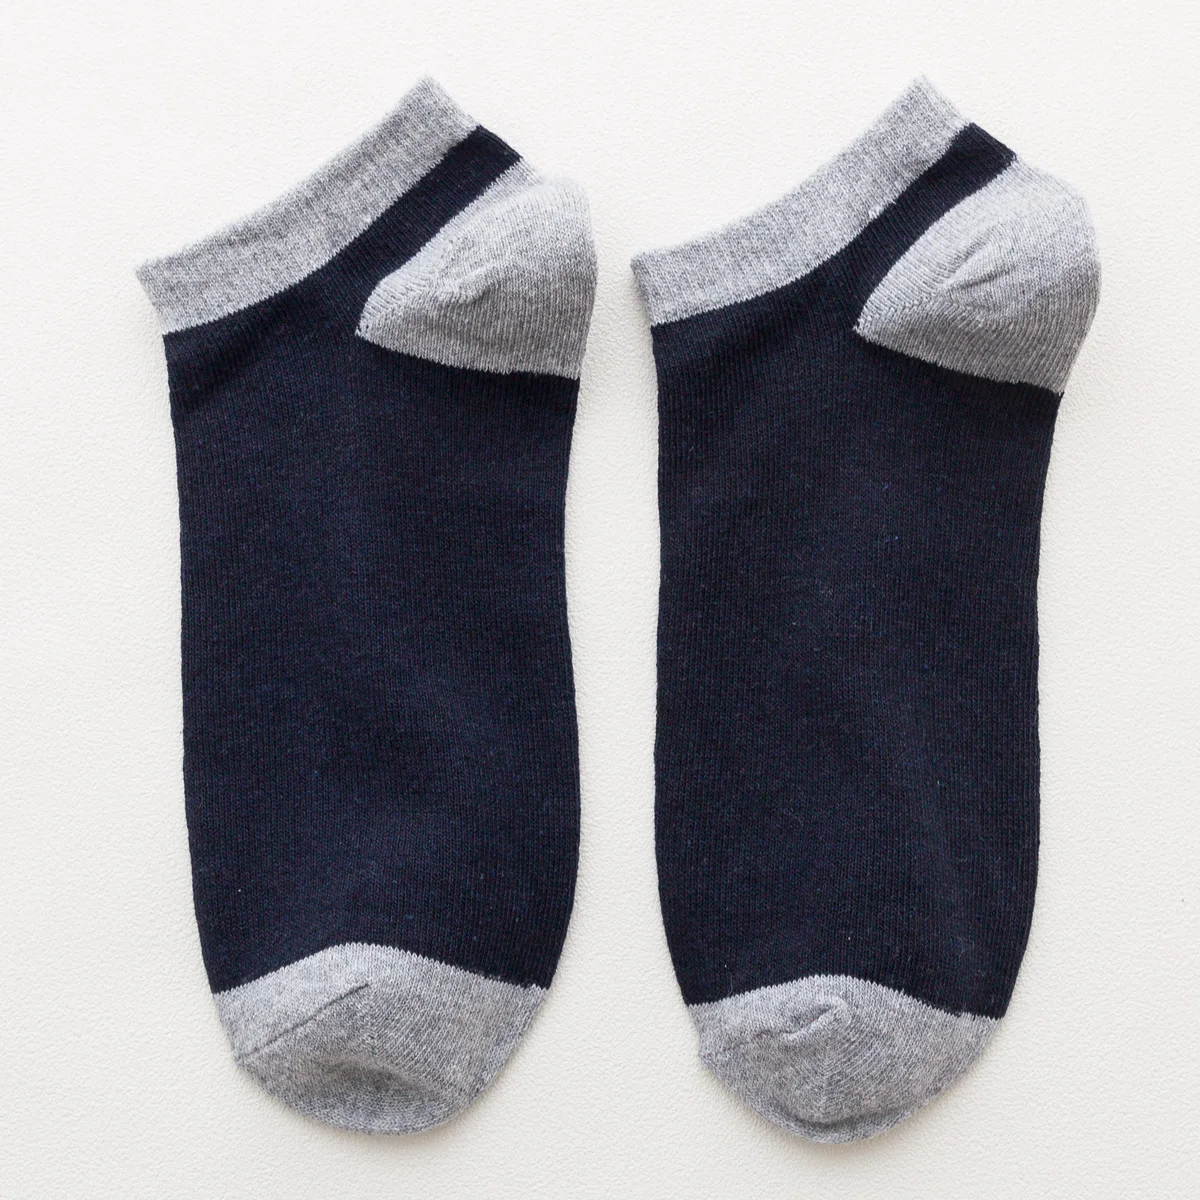 Factory Price Cheap Ankle Socks Cotton Casual Breathable Disposable Socks Short Mens Boat Funky Socks